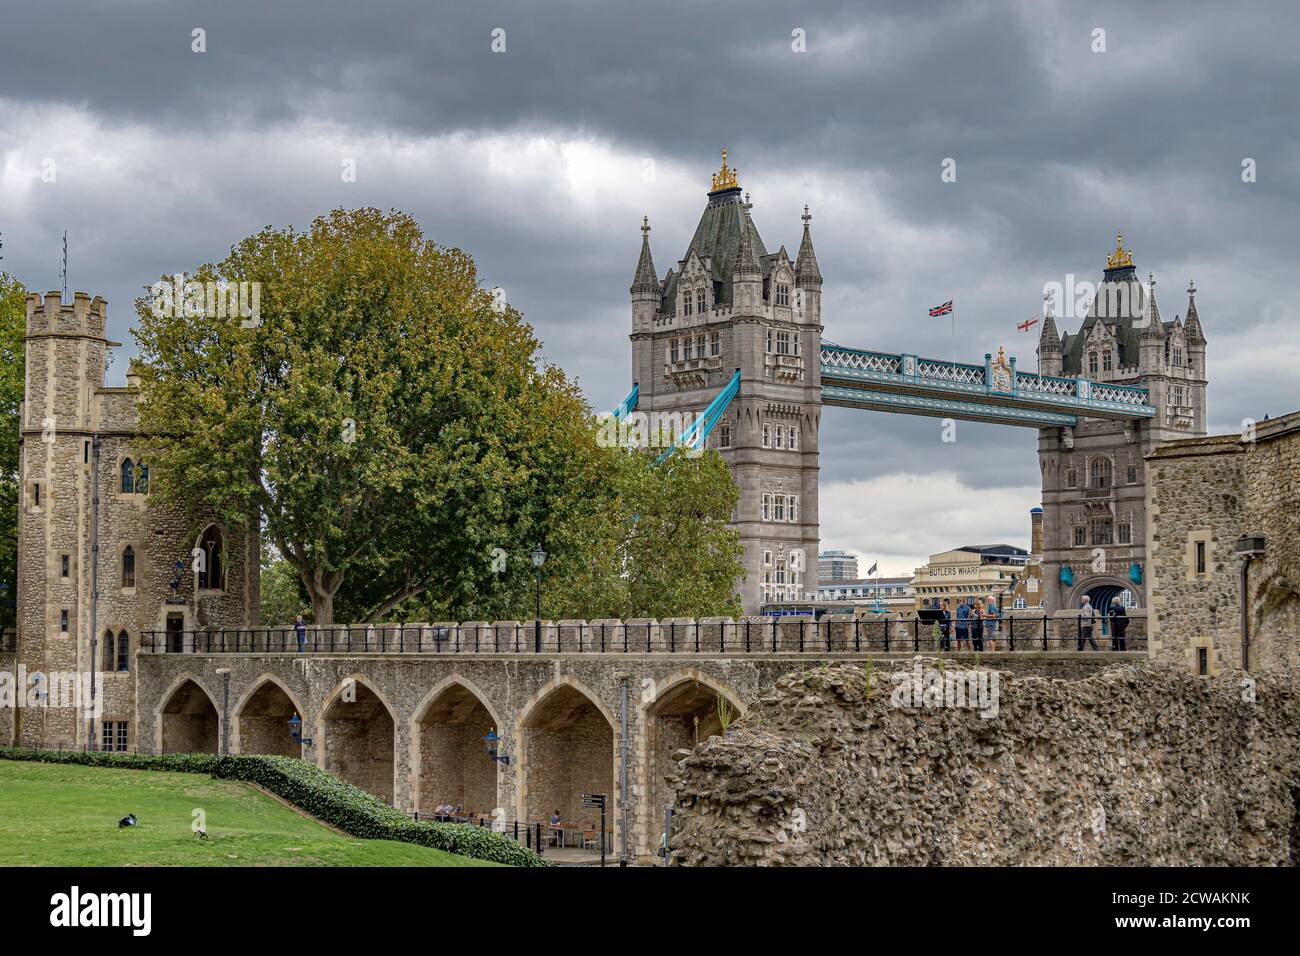 Tower Bridge, a world famous London landmark seen from inside the walls of The Tower Of London , London EC3 Stock Photo